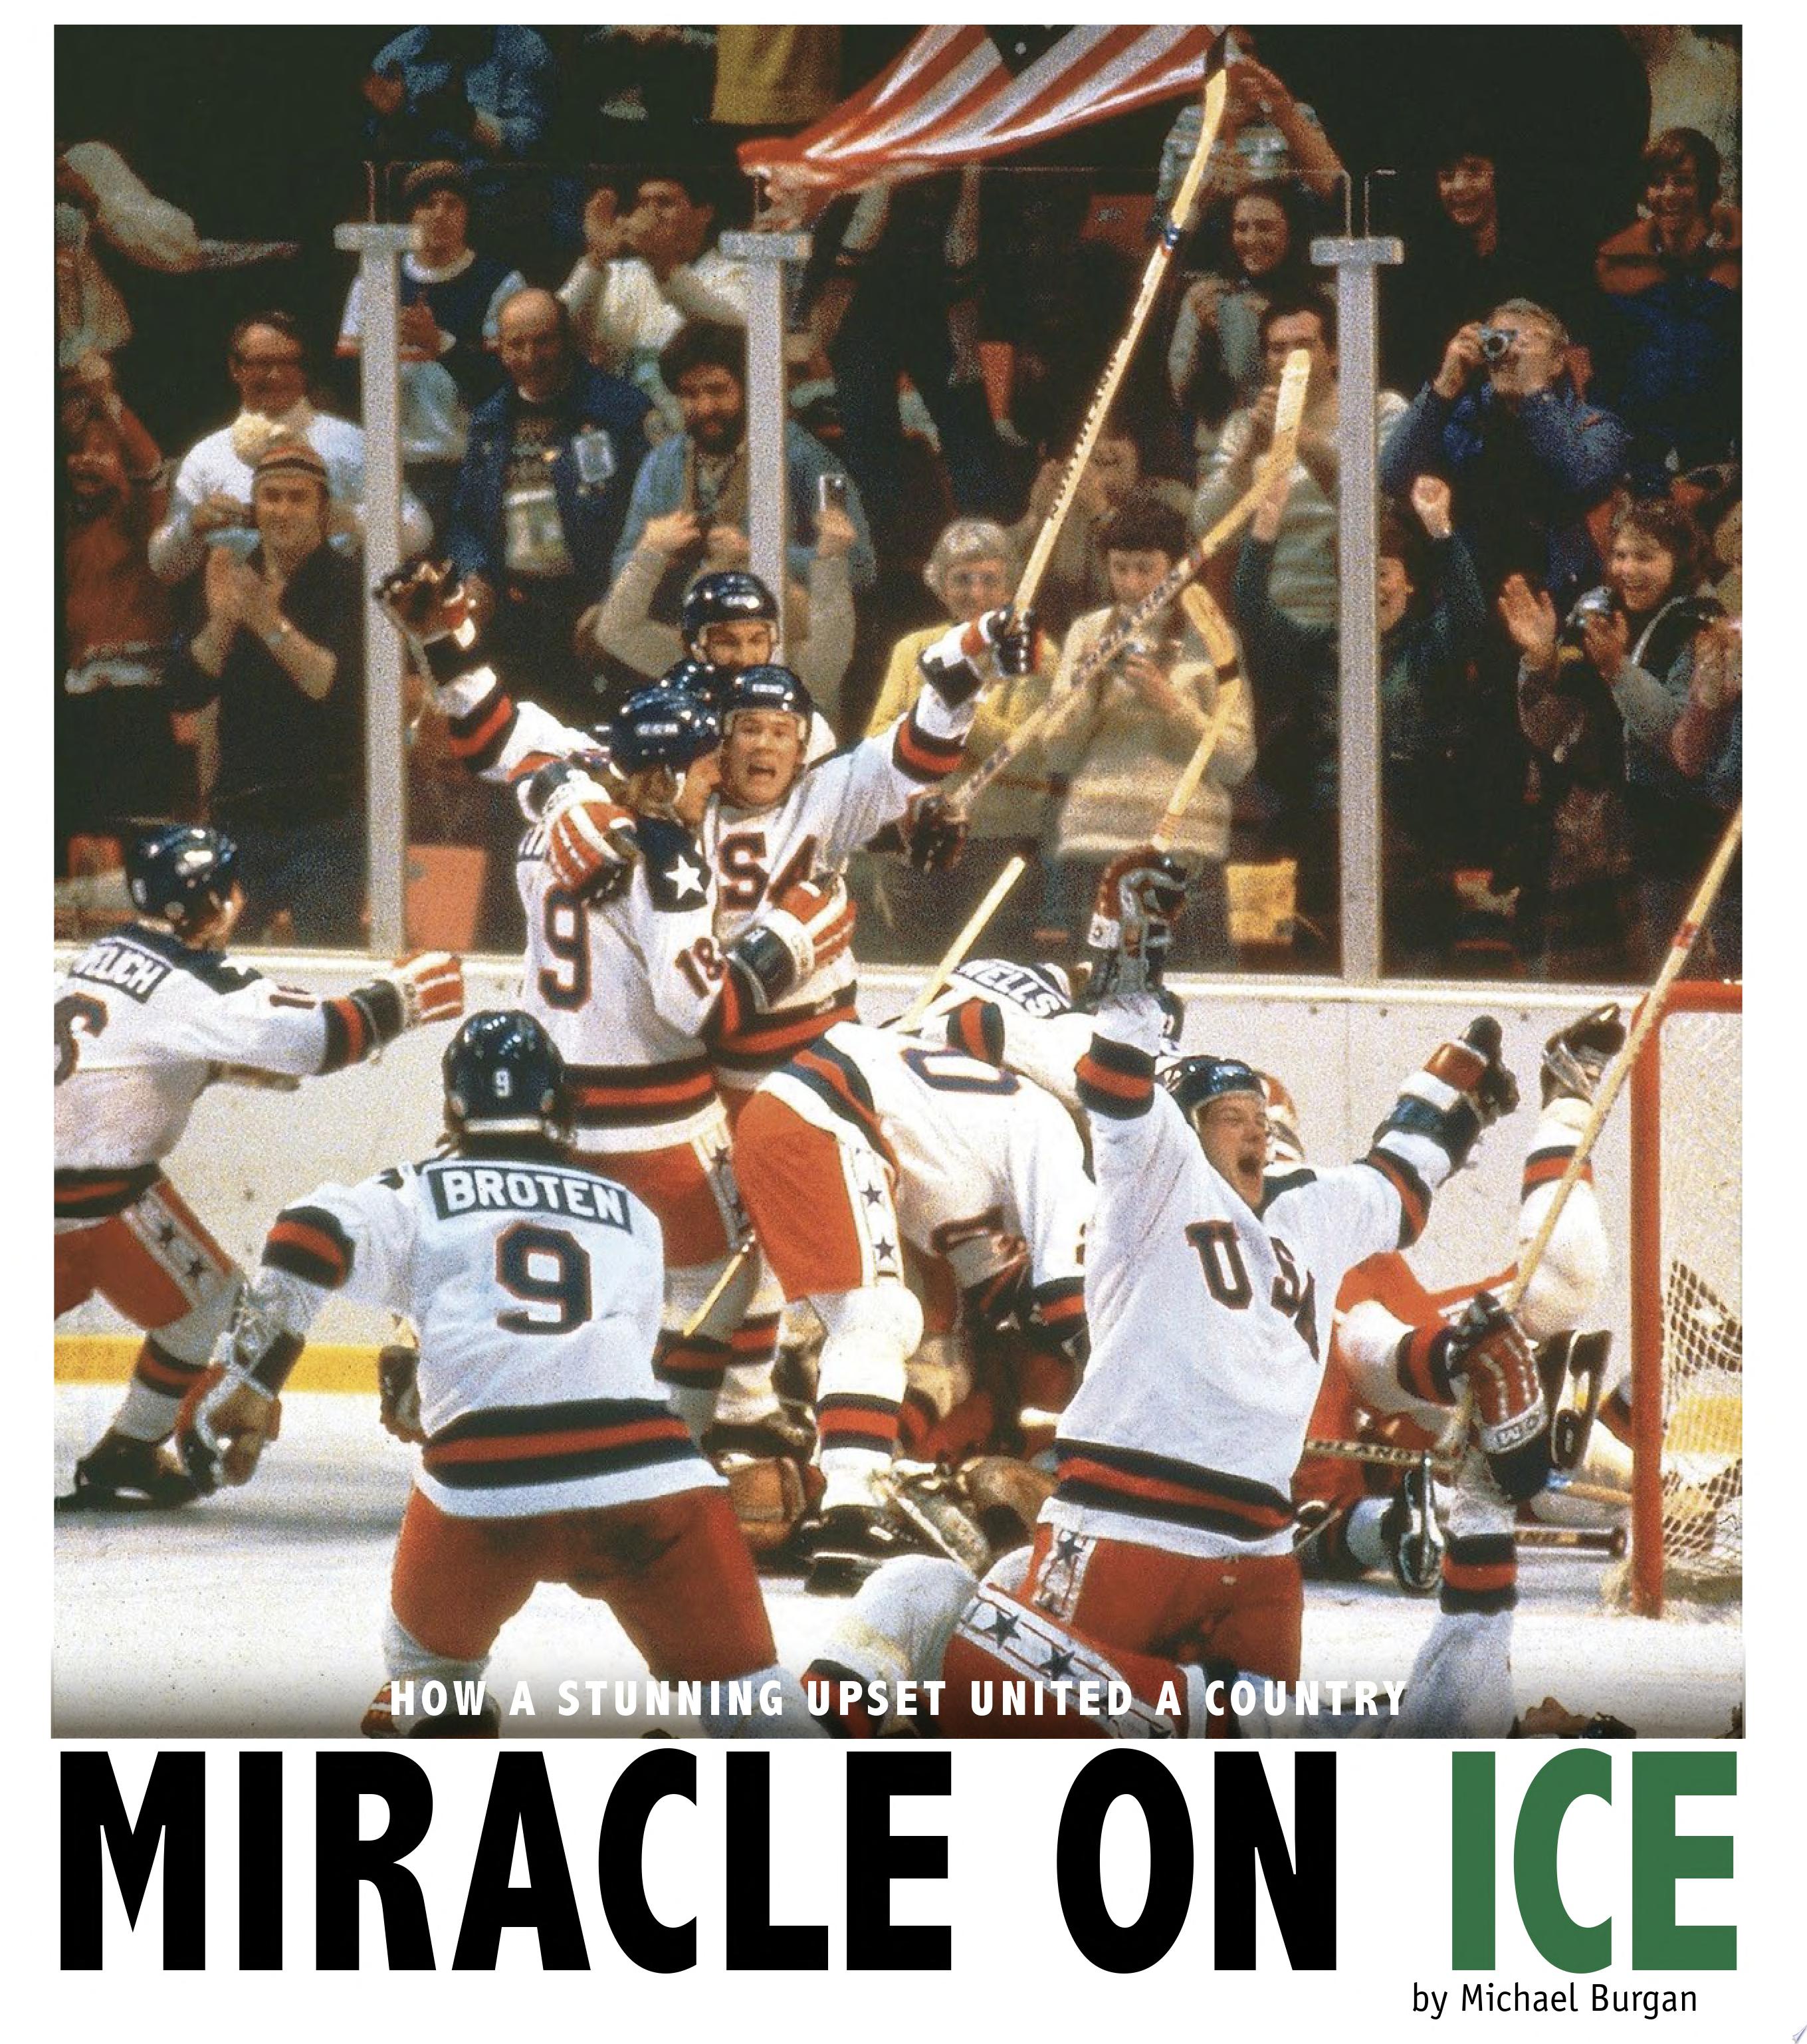 Image for "Miracle on Ice"